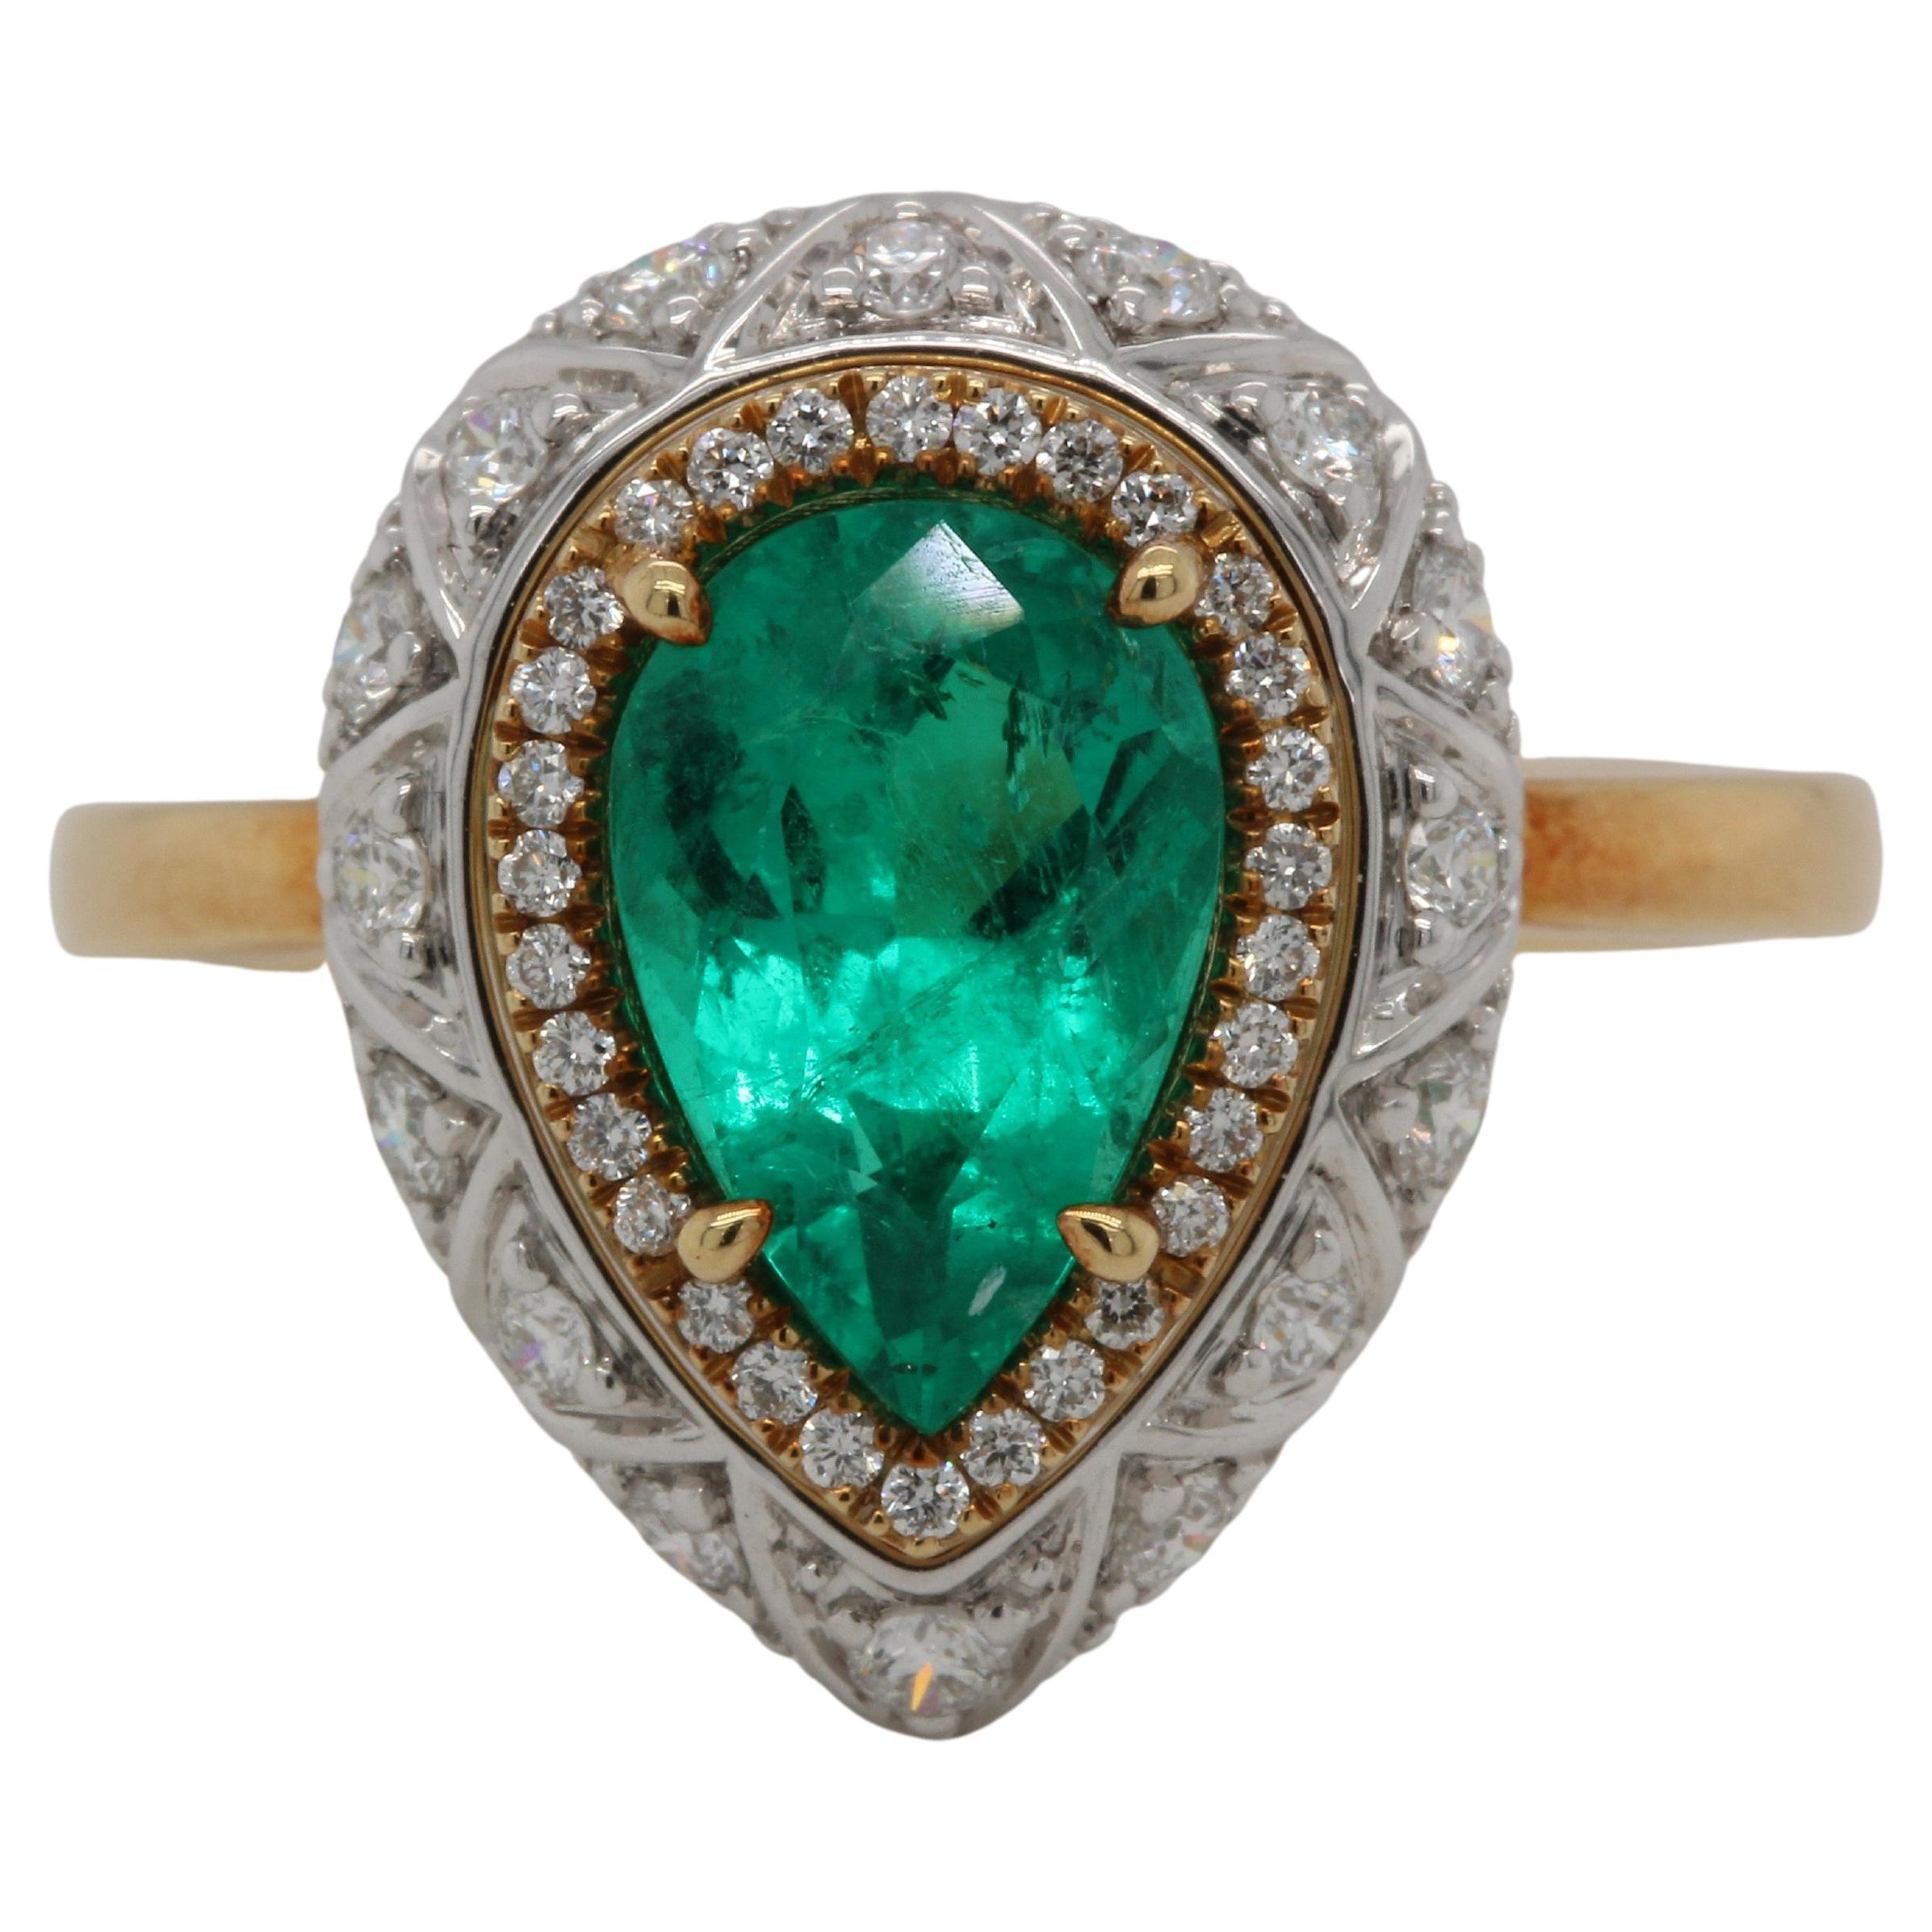 Graceful and elegant, our gorgeous emerald and diamond ring is a timeless symbol of love. A stunning 1.63 carat emerald pear sits set with dazzling white diamonds, making this one-of-a-kind piece a must-have addition to any woman’s jewelry box or